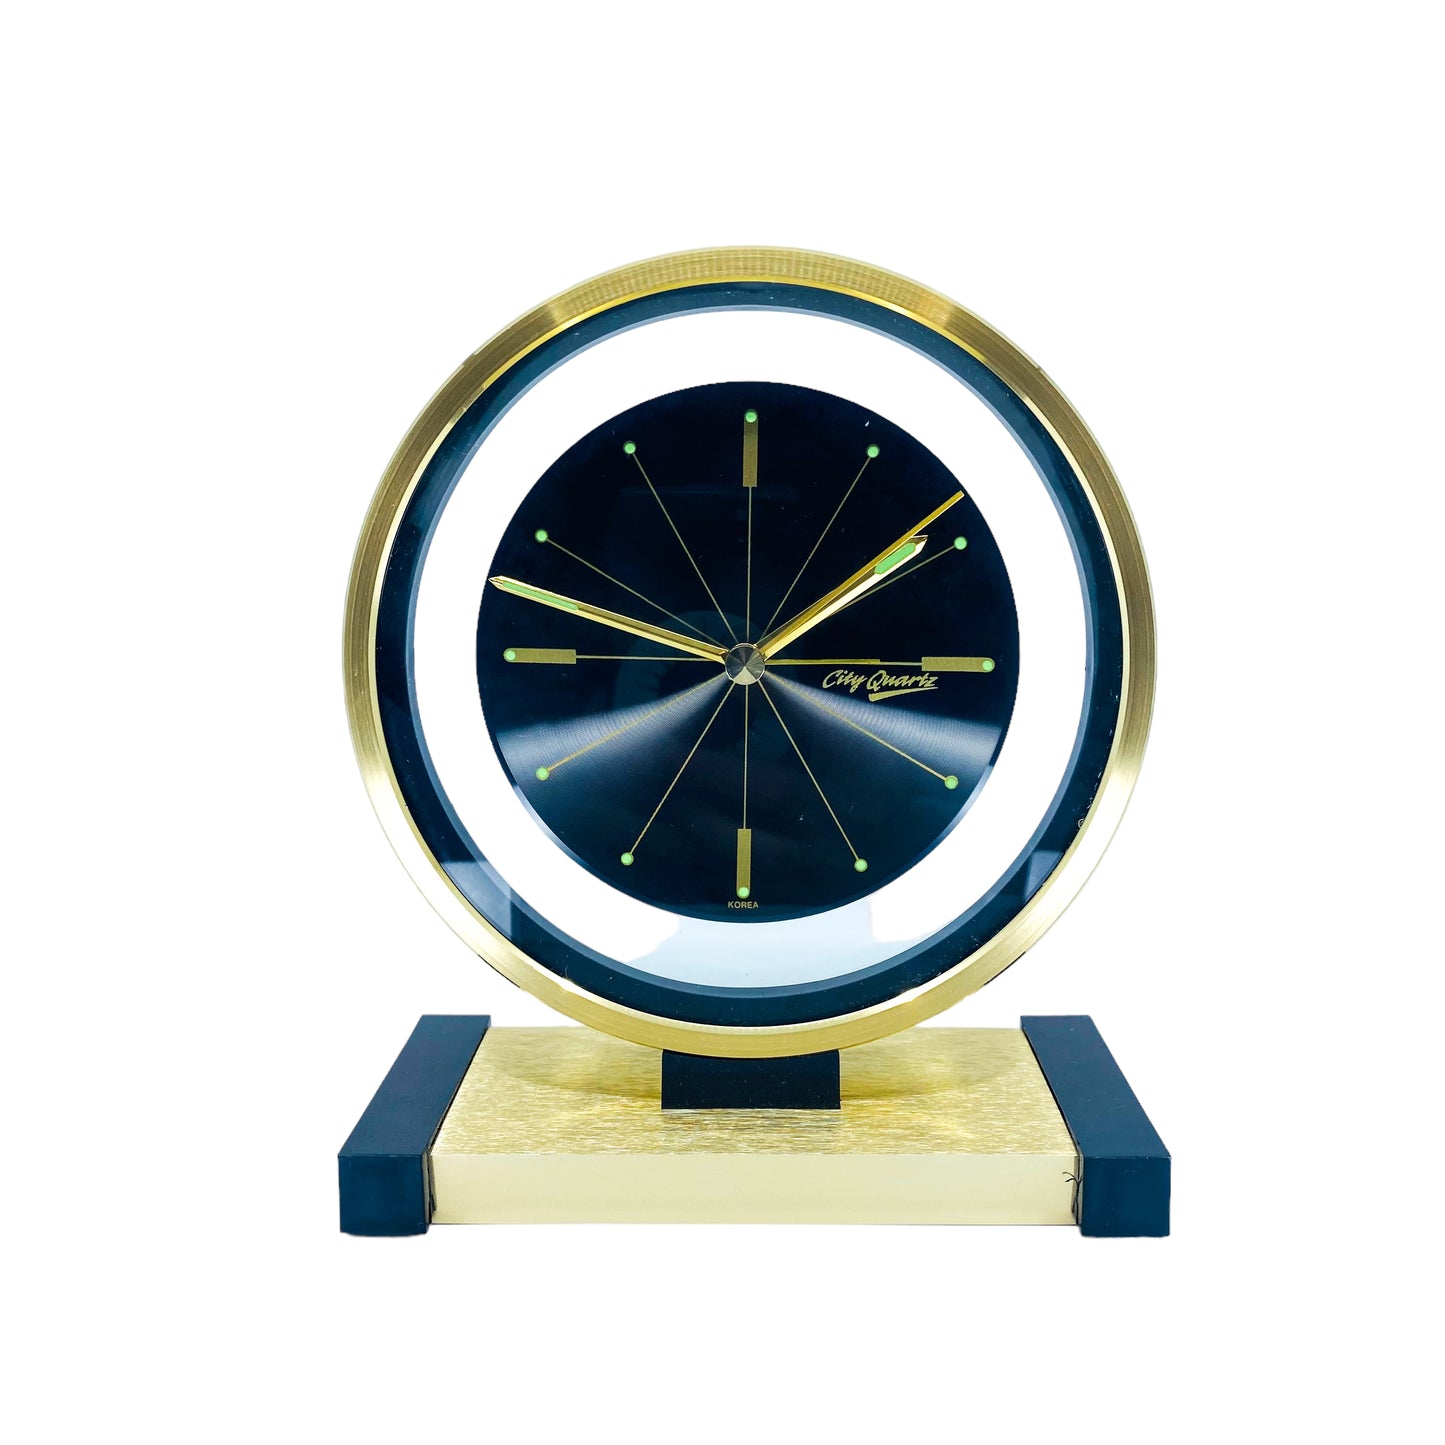 Atomic Starburst City Quartz Table Clock, styled after Eames Nelson